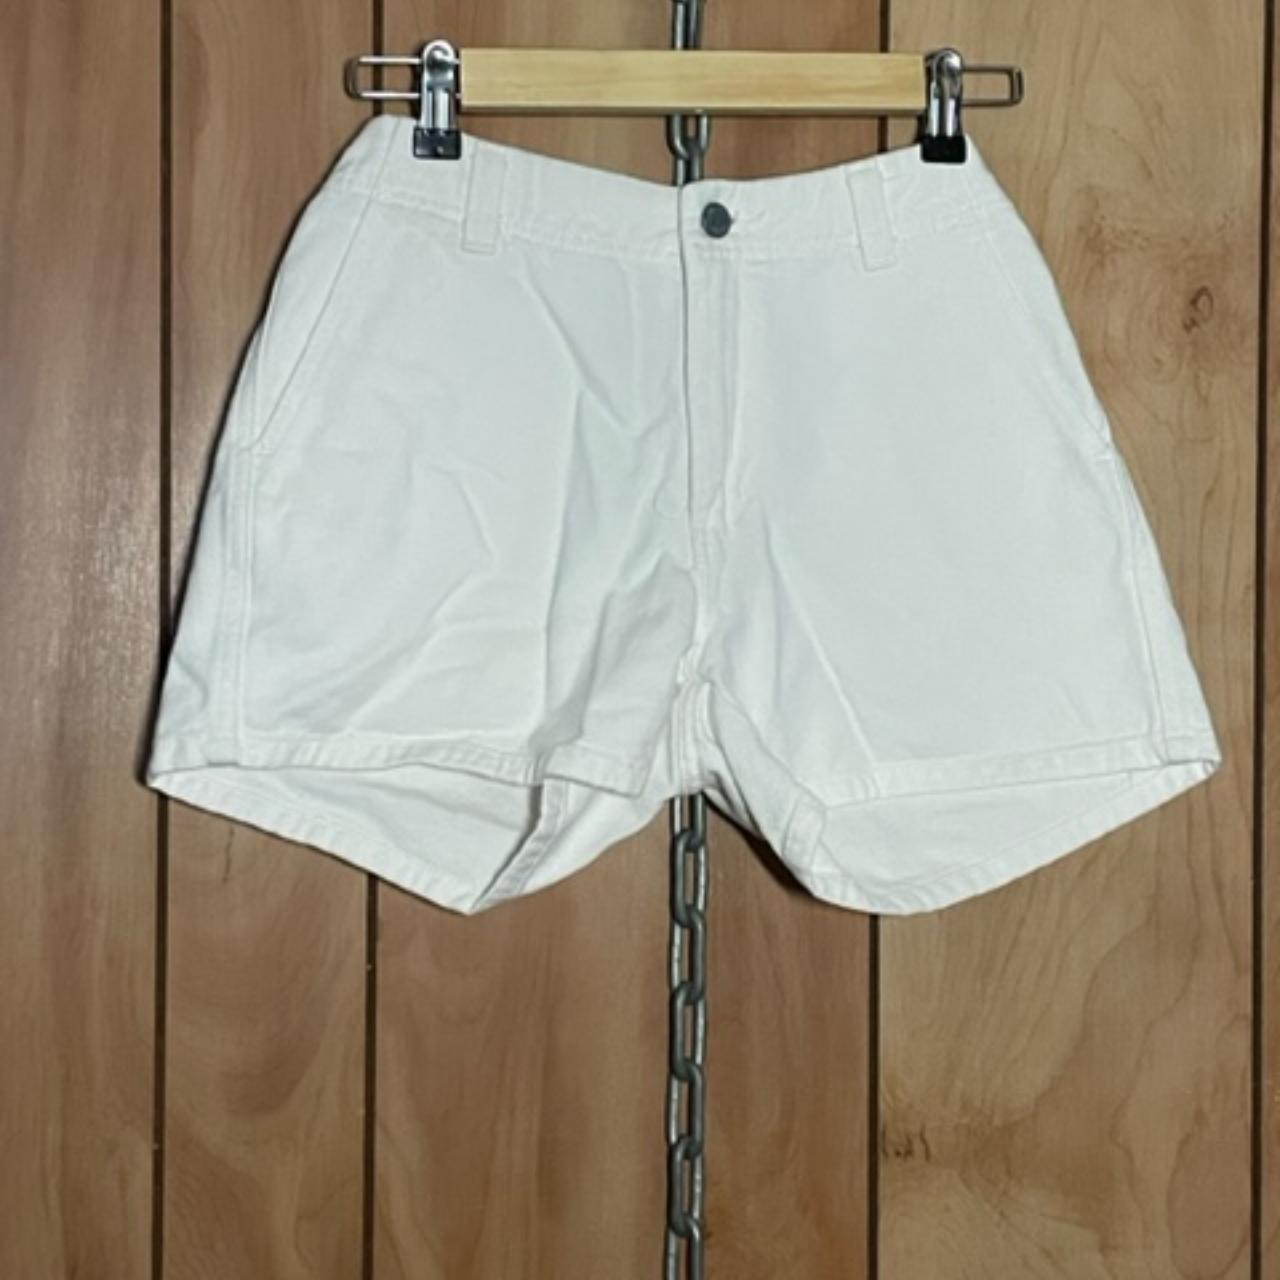 Vintage mid waisted white shorts with adjustable... - Depop